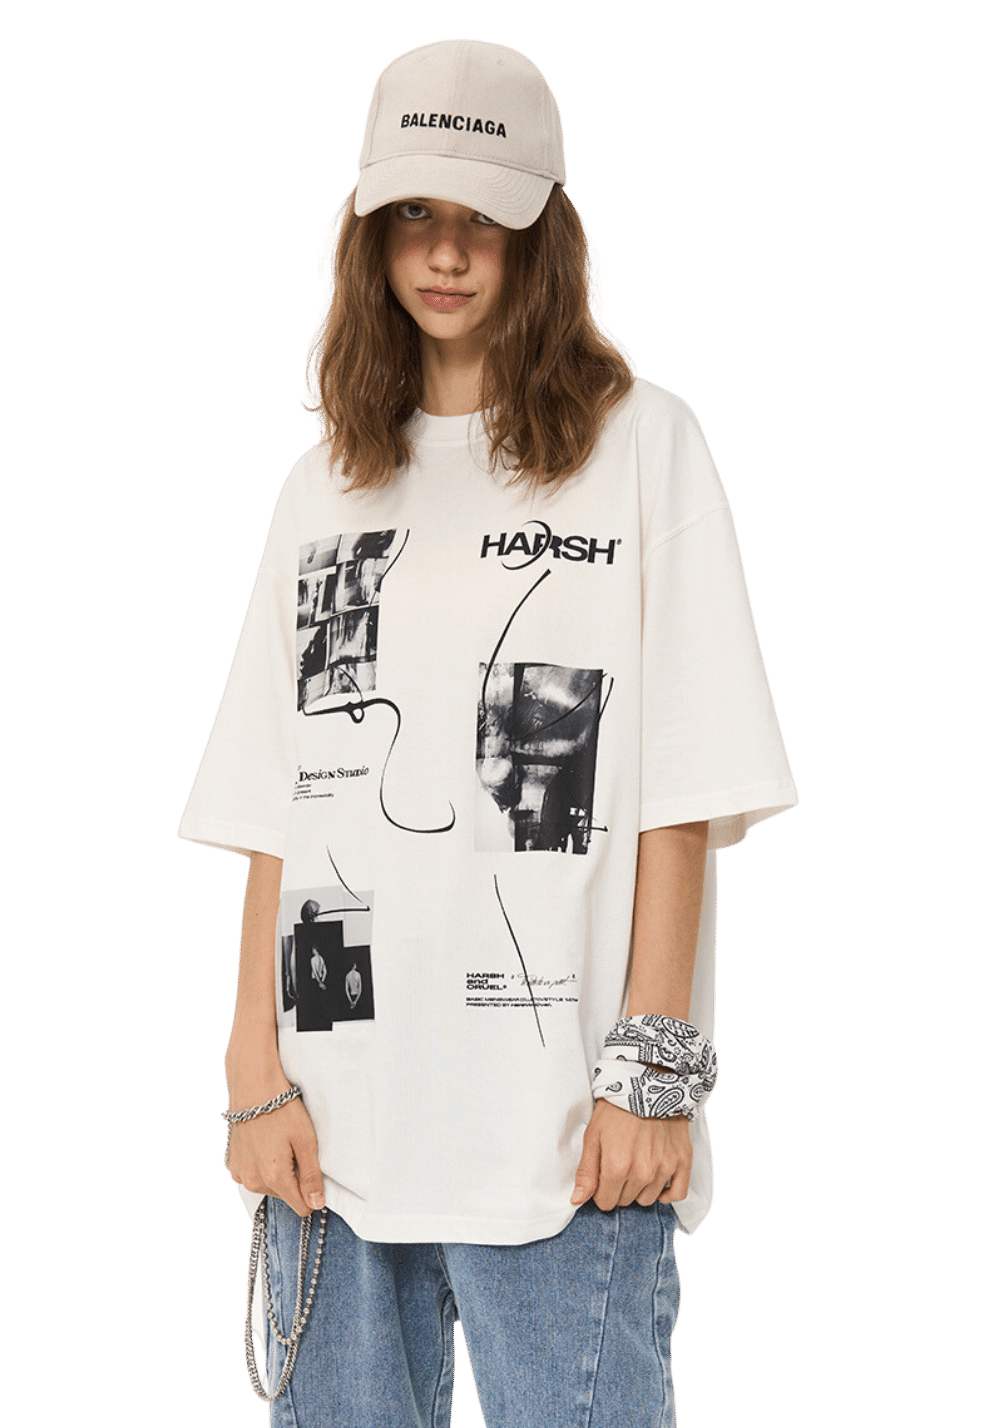 Pictures Decoupage Printed Tee - PSYLOS 1, Pictures Decoupage Printed Tee, T-Shirt, HARSH AND CRUEL, PSYLOS 1